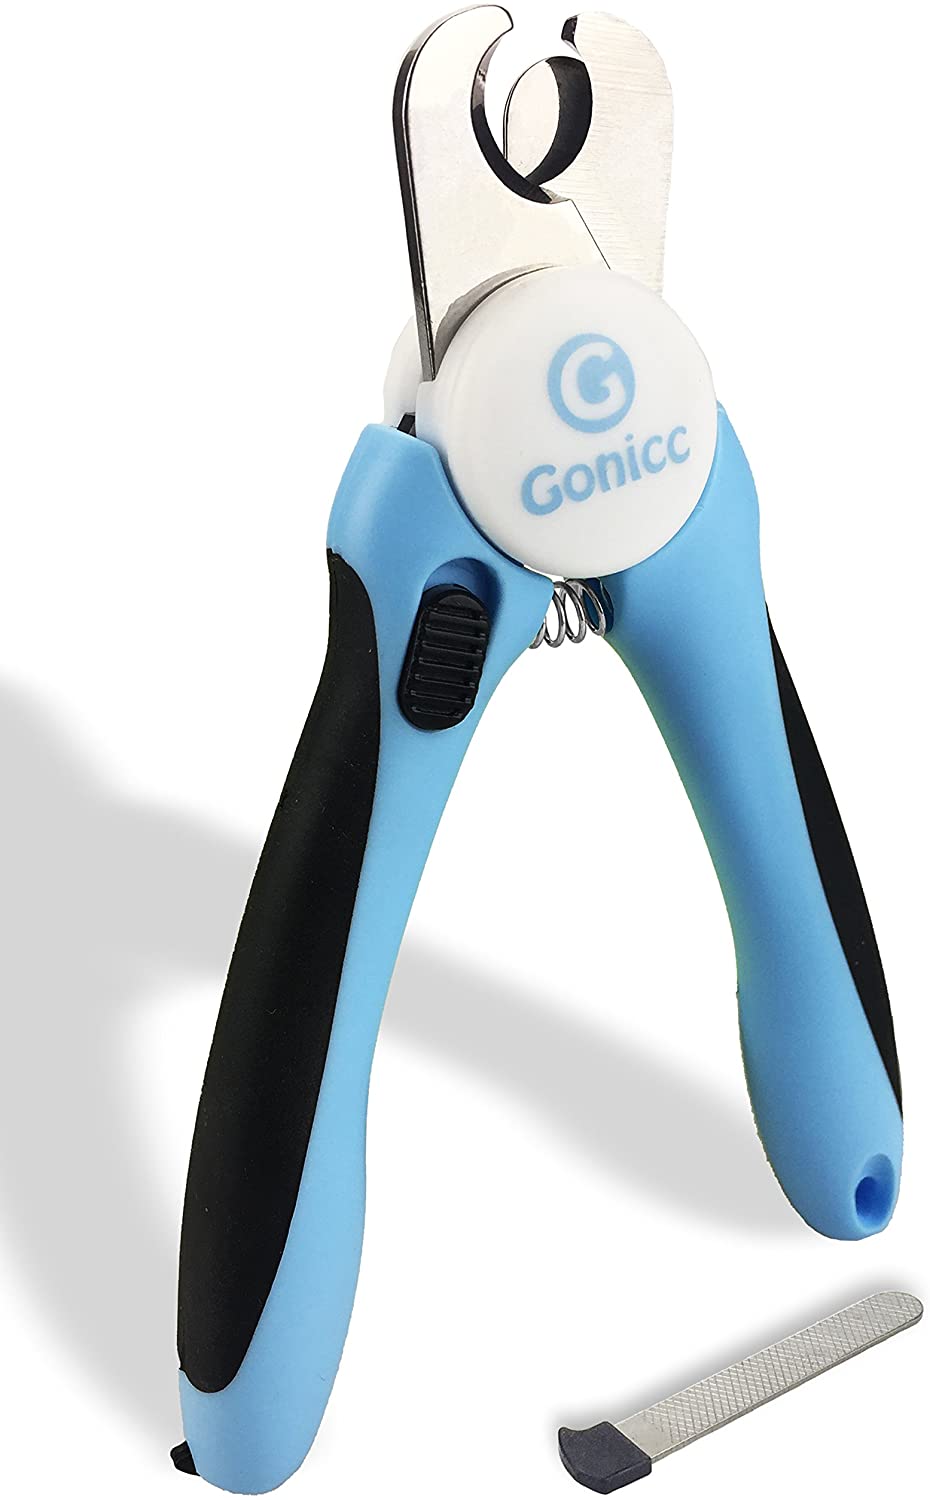 Gonicc High-Quality Stainless Steel Safety Dog Nail Clippers